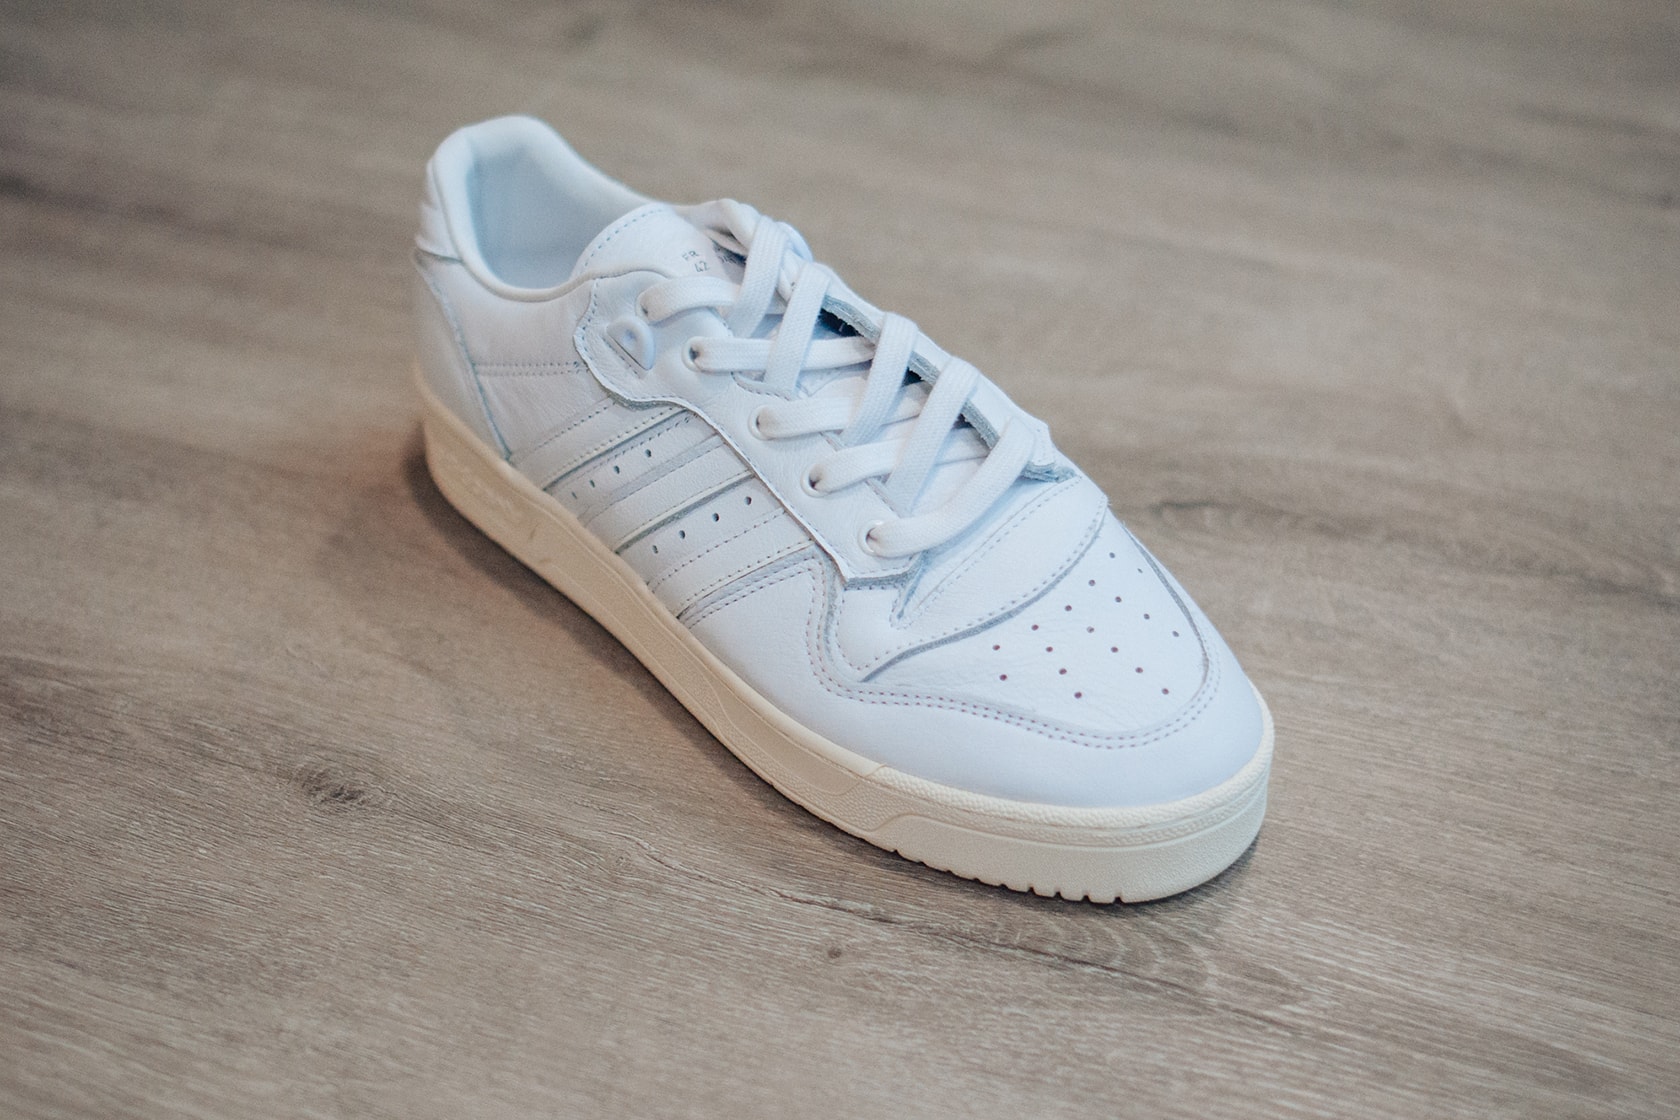 adidas originals all white sneakers trainers footwear shoes home of classics pack paris Stan Smith Superstar 80s Continental 80 Torsion Comp SC Premiere AR Trainer Nizza Rivalry Supercourt RX